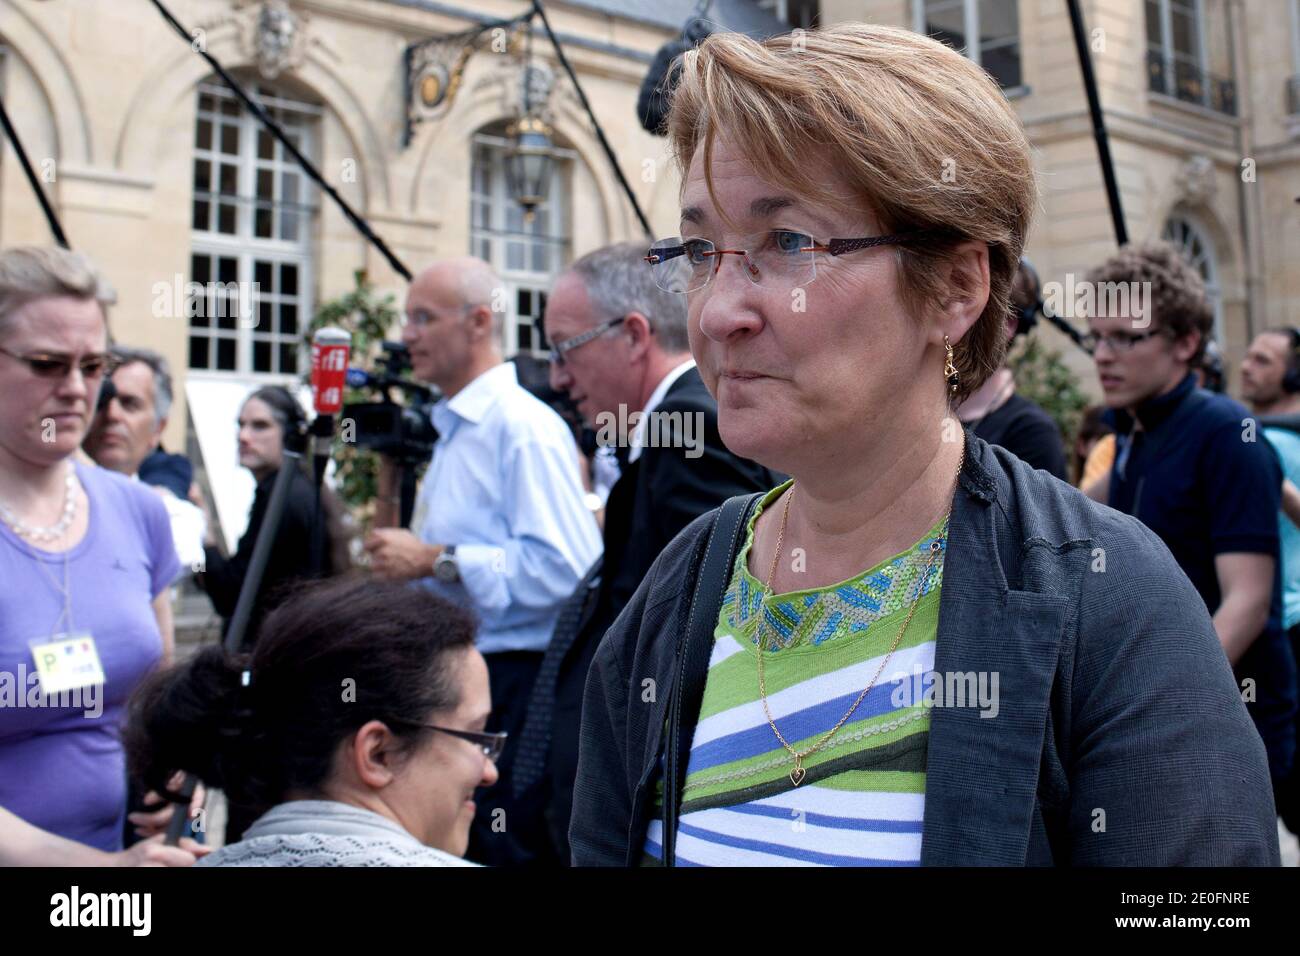 CGT labour union leader Bernard Thibault answers to medias next to Nadine Prigent after a meeting with French Prime Minister, Jean-Marc Ayrault, at the Hotel Matignon, in Paris, France on May 29, 2012. Photo by Stephane Lemouton/ABACAPRESS.COM. Stock Photo